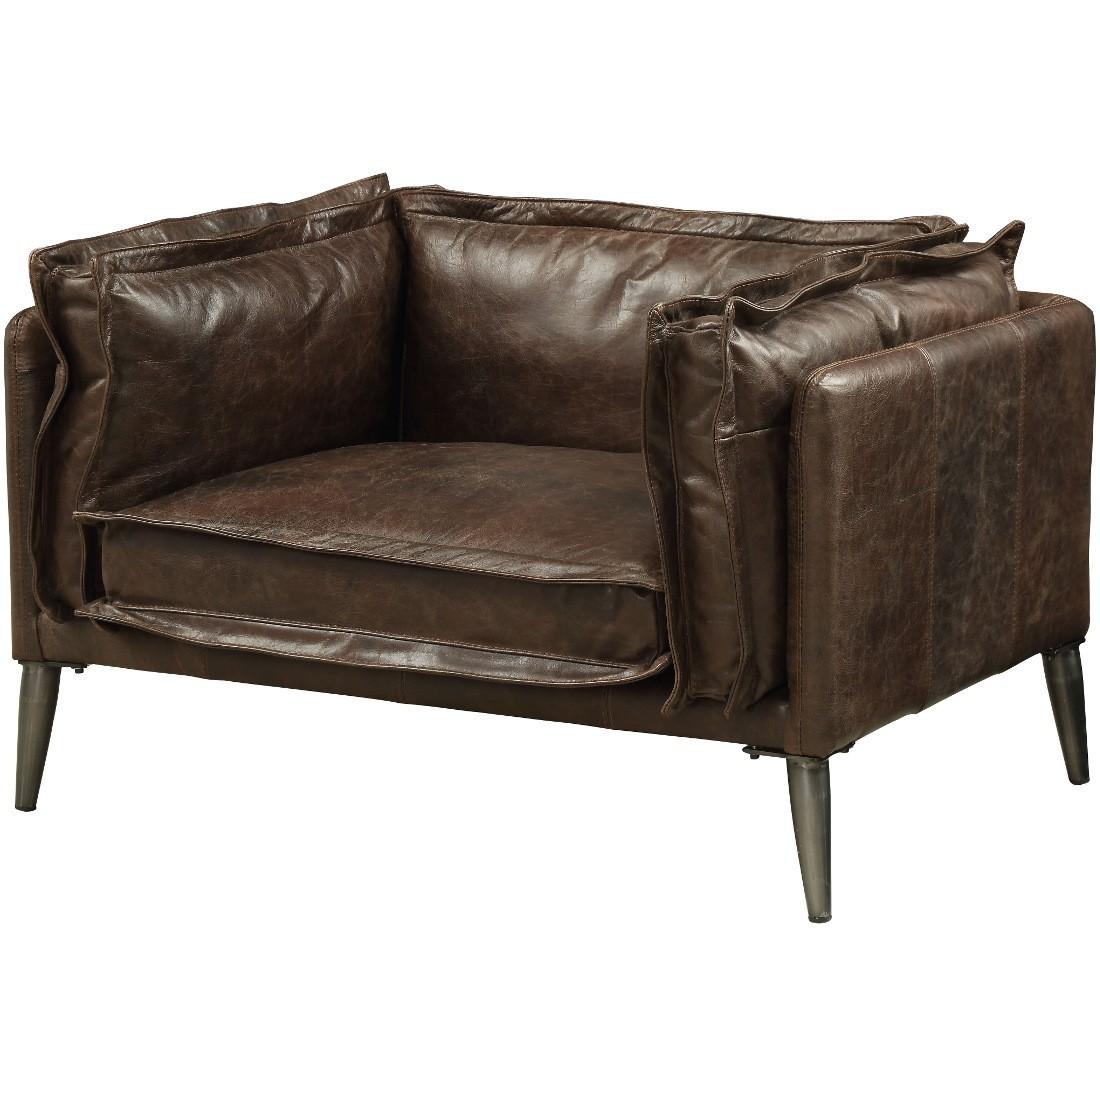 Acme Furniture Porchester-52482 Oversized Chair